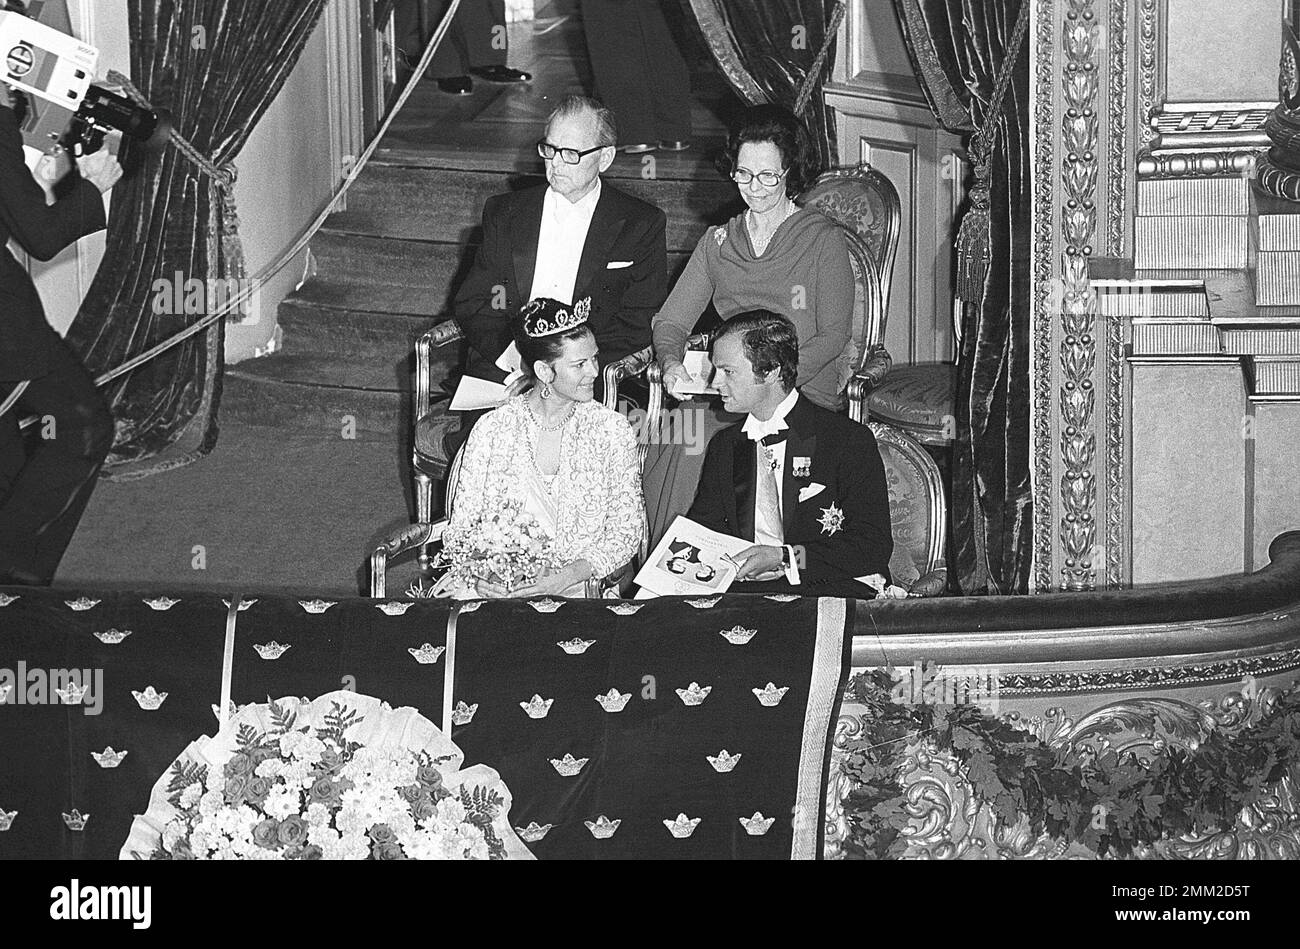 Wedding of Carl XVI Gustaf and Silvia Sommerlath. Carl XVI Gustaf, King of Sweden. Born 30 april 1946. Pictured in the evening the day before their wedding at a gala at the royal opera in Stockholm 18 june 1976. Silivas mother and father is sitting behind them, Walther and Alice Sommerlath.  ref BV36-7 Stock Photo